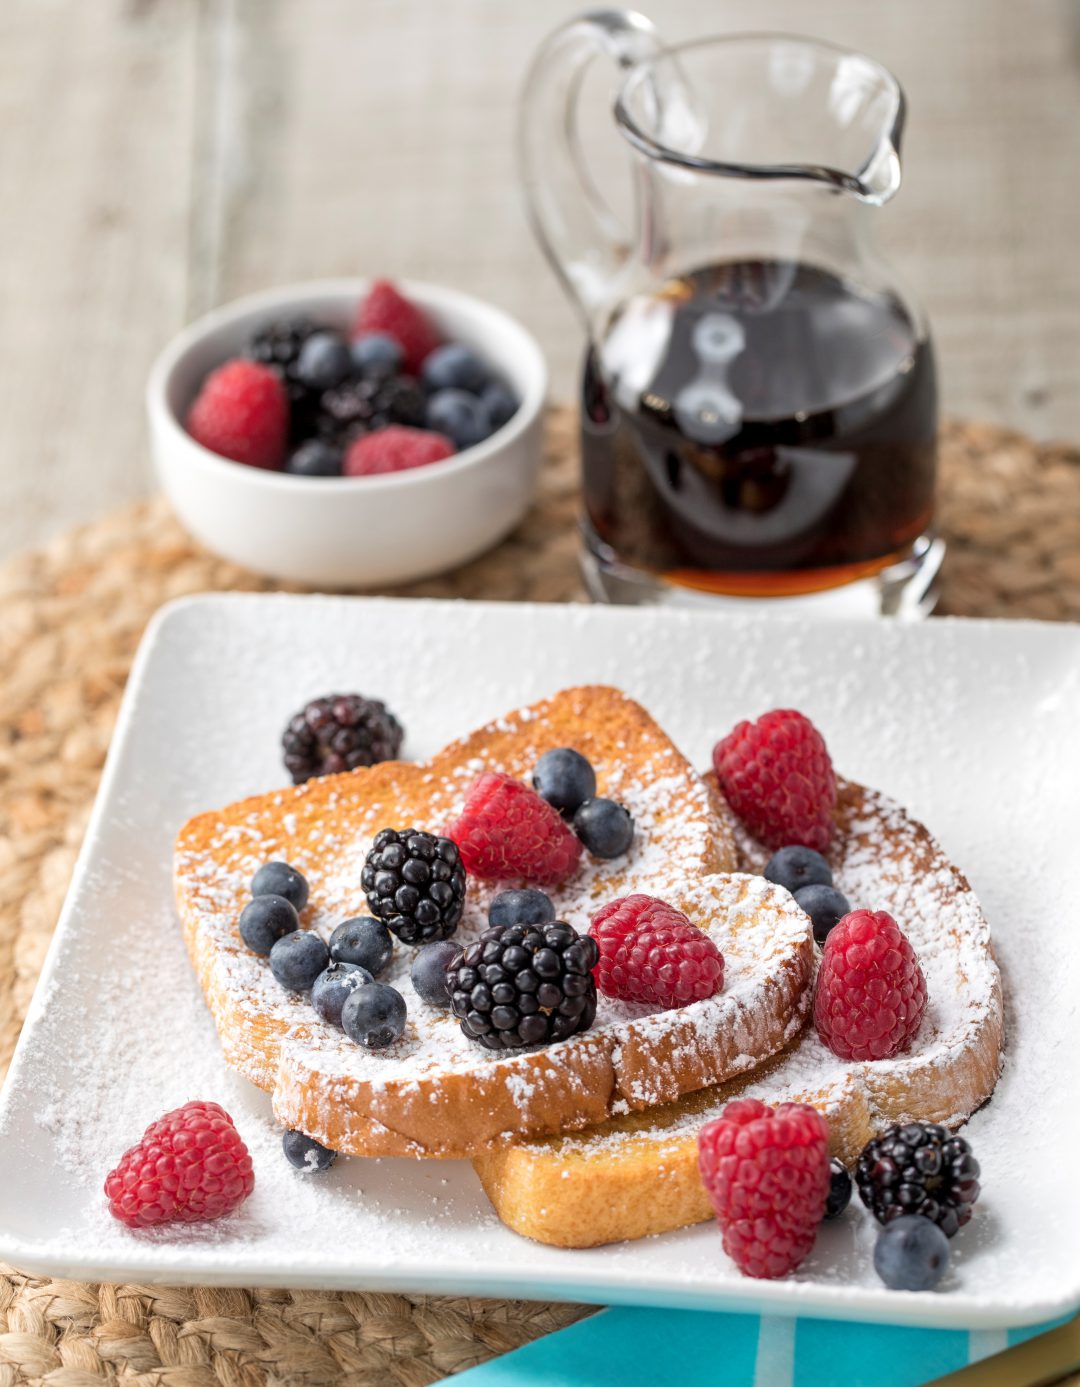 Toast on a plate with powder and rasberries next to syrup.